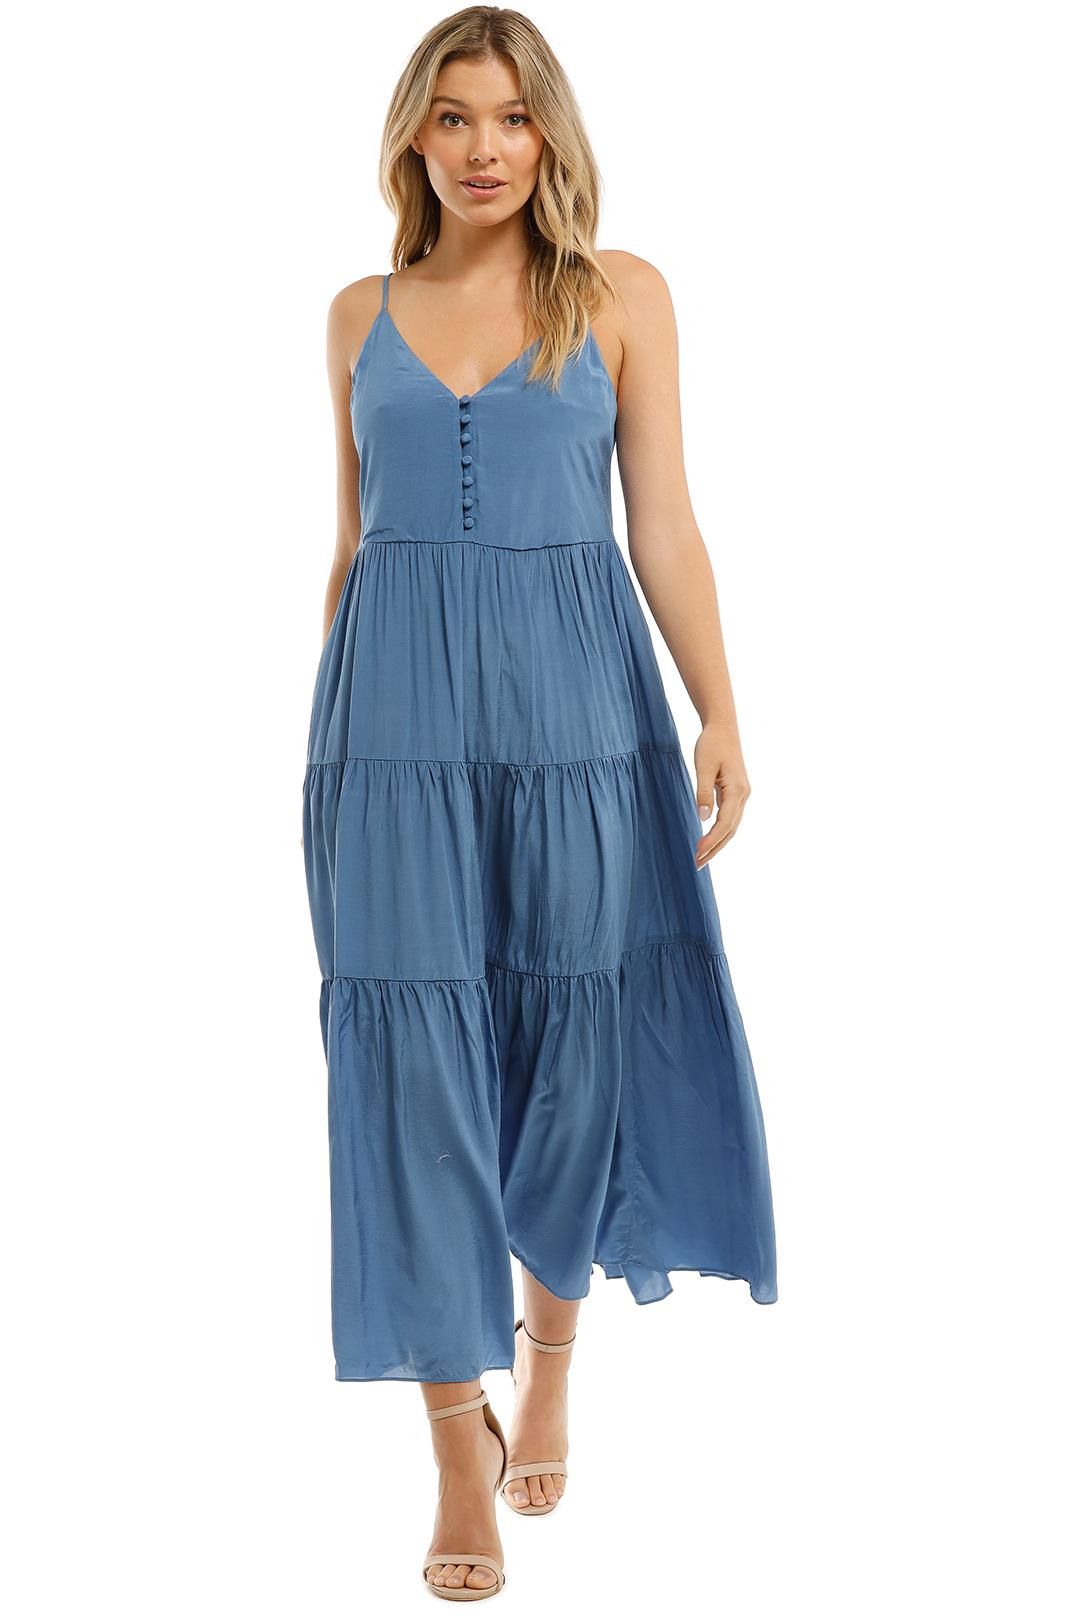 witchery Tiered Button Front Dress Maxi Sleeveless